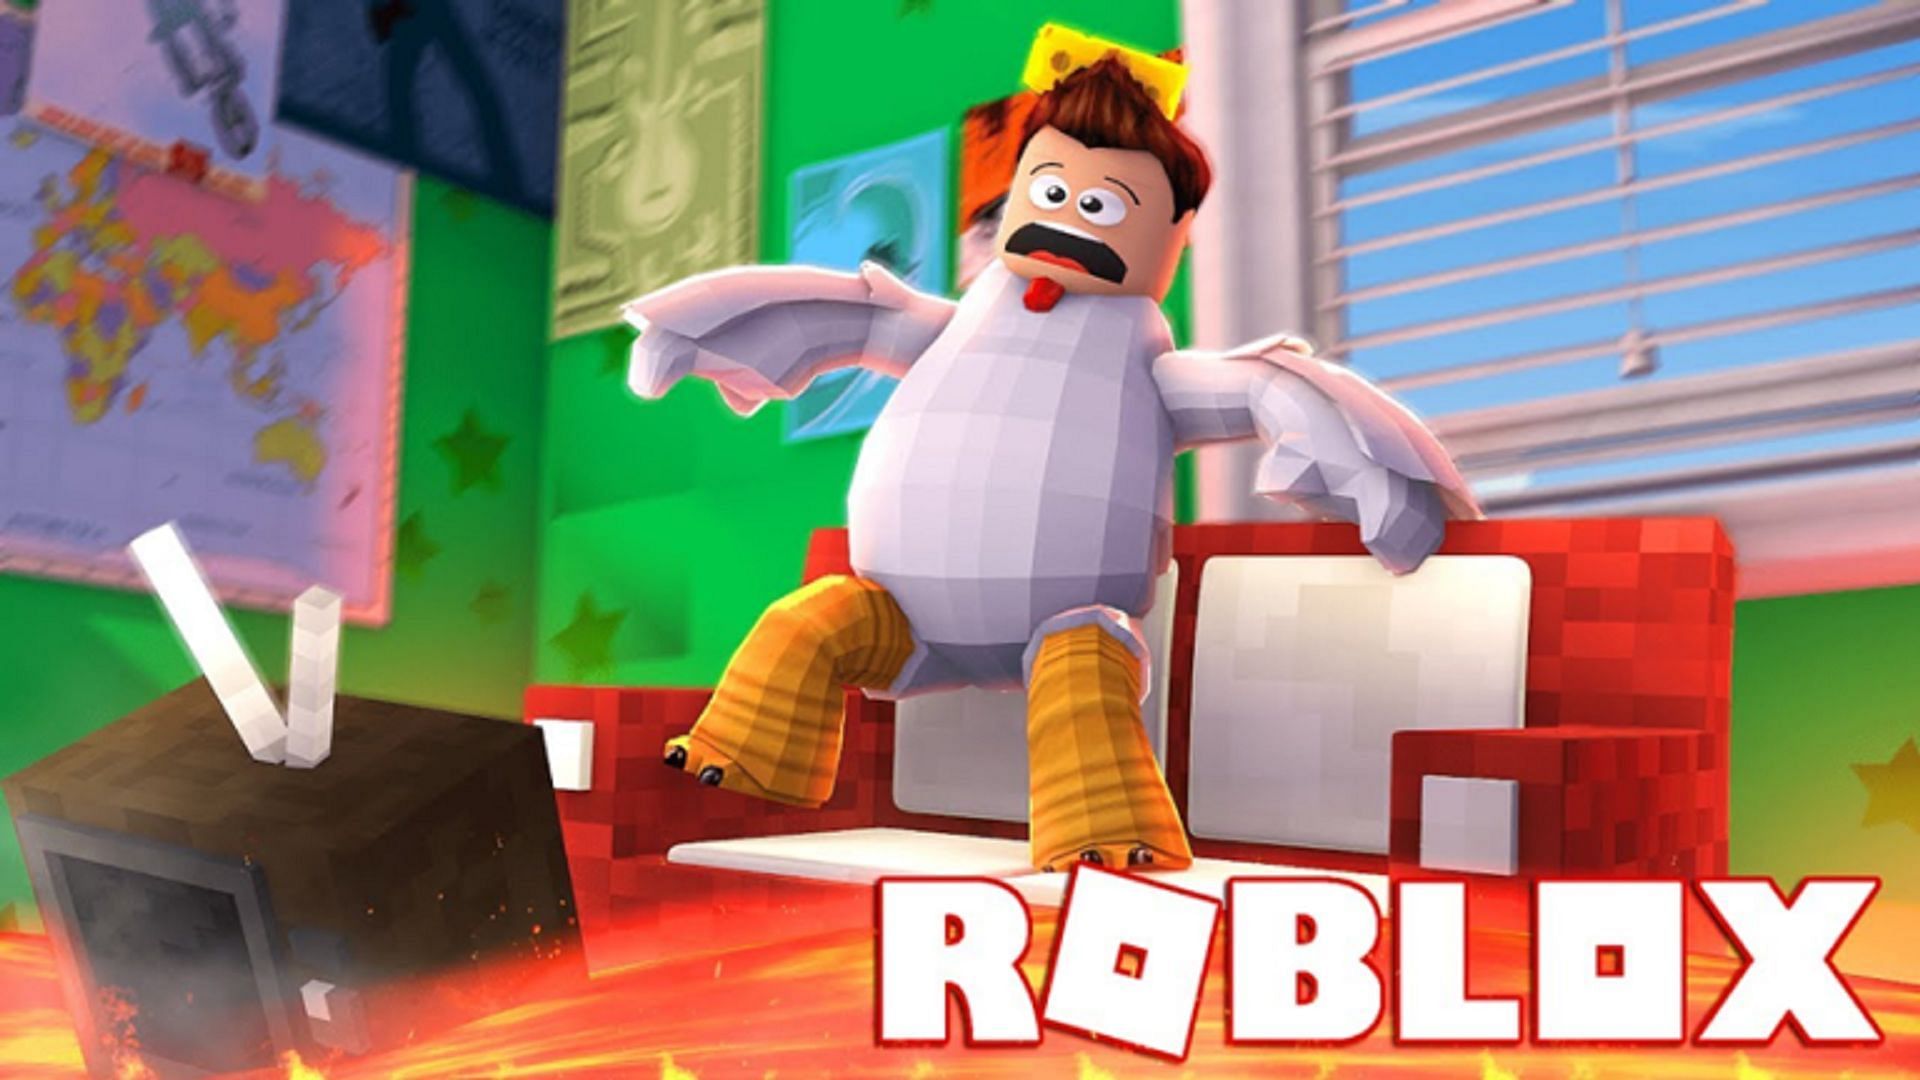 Roblox The Floor Is Lava Codes